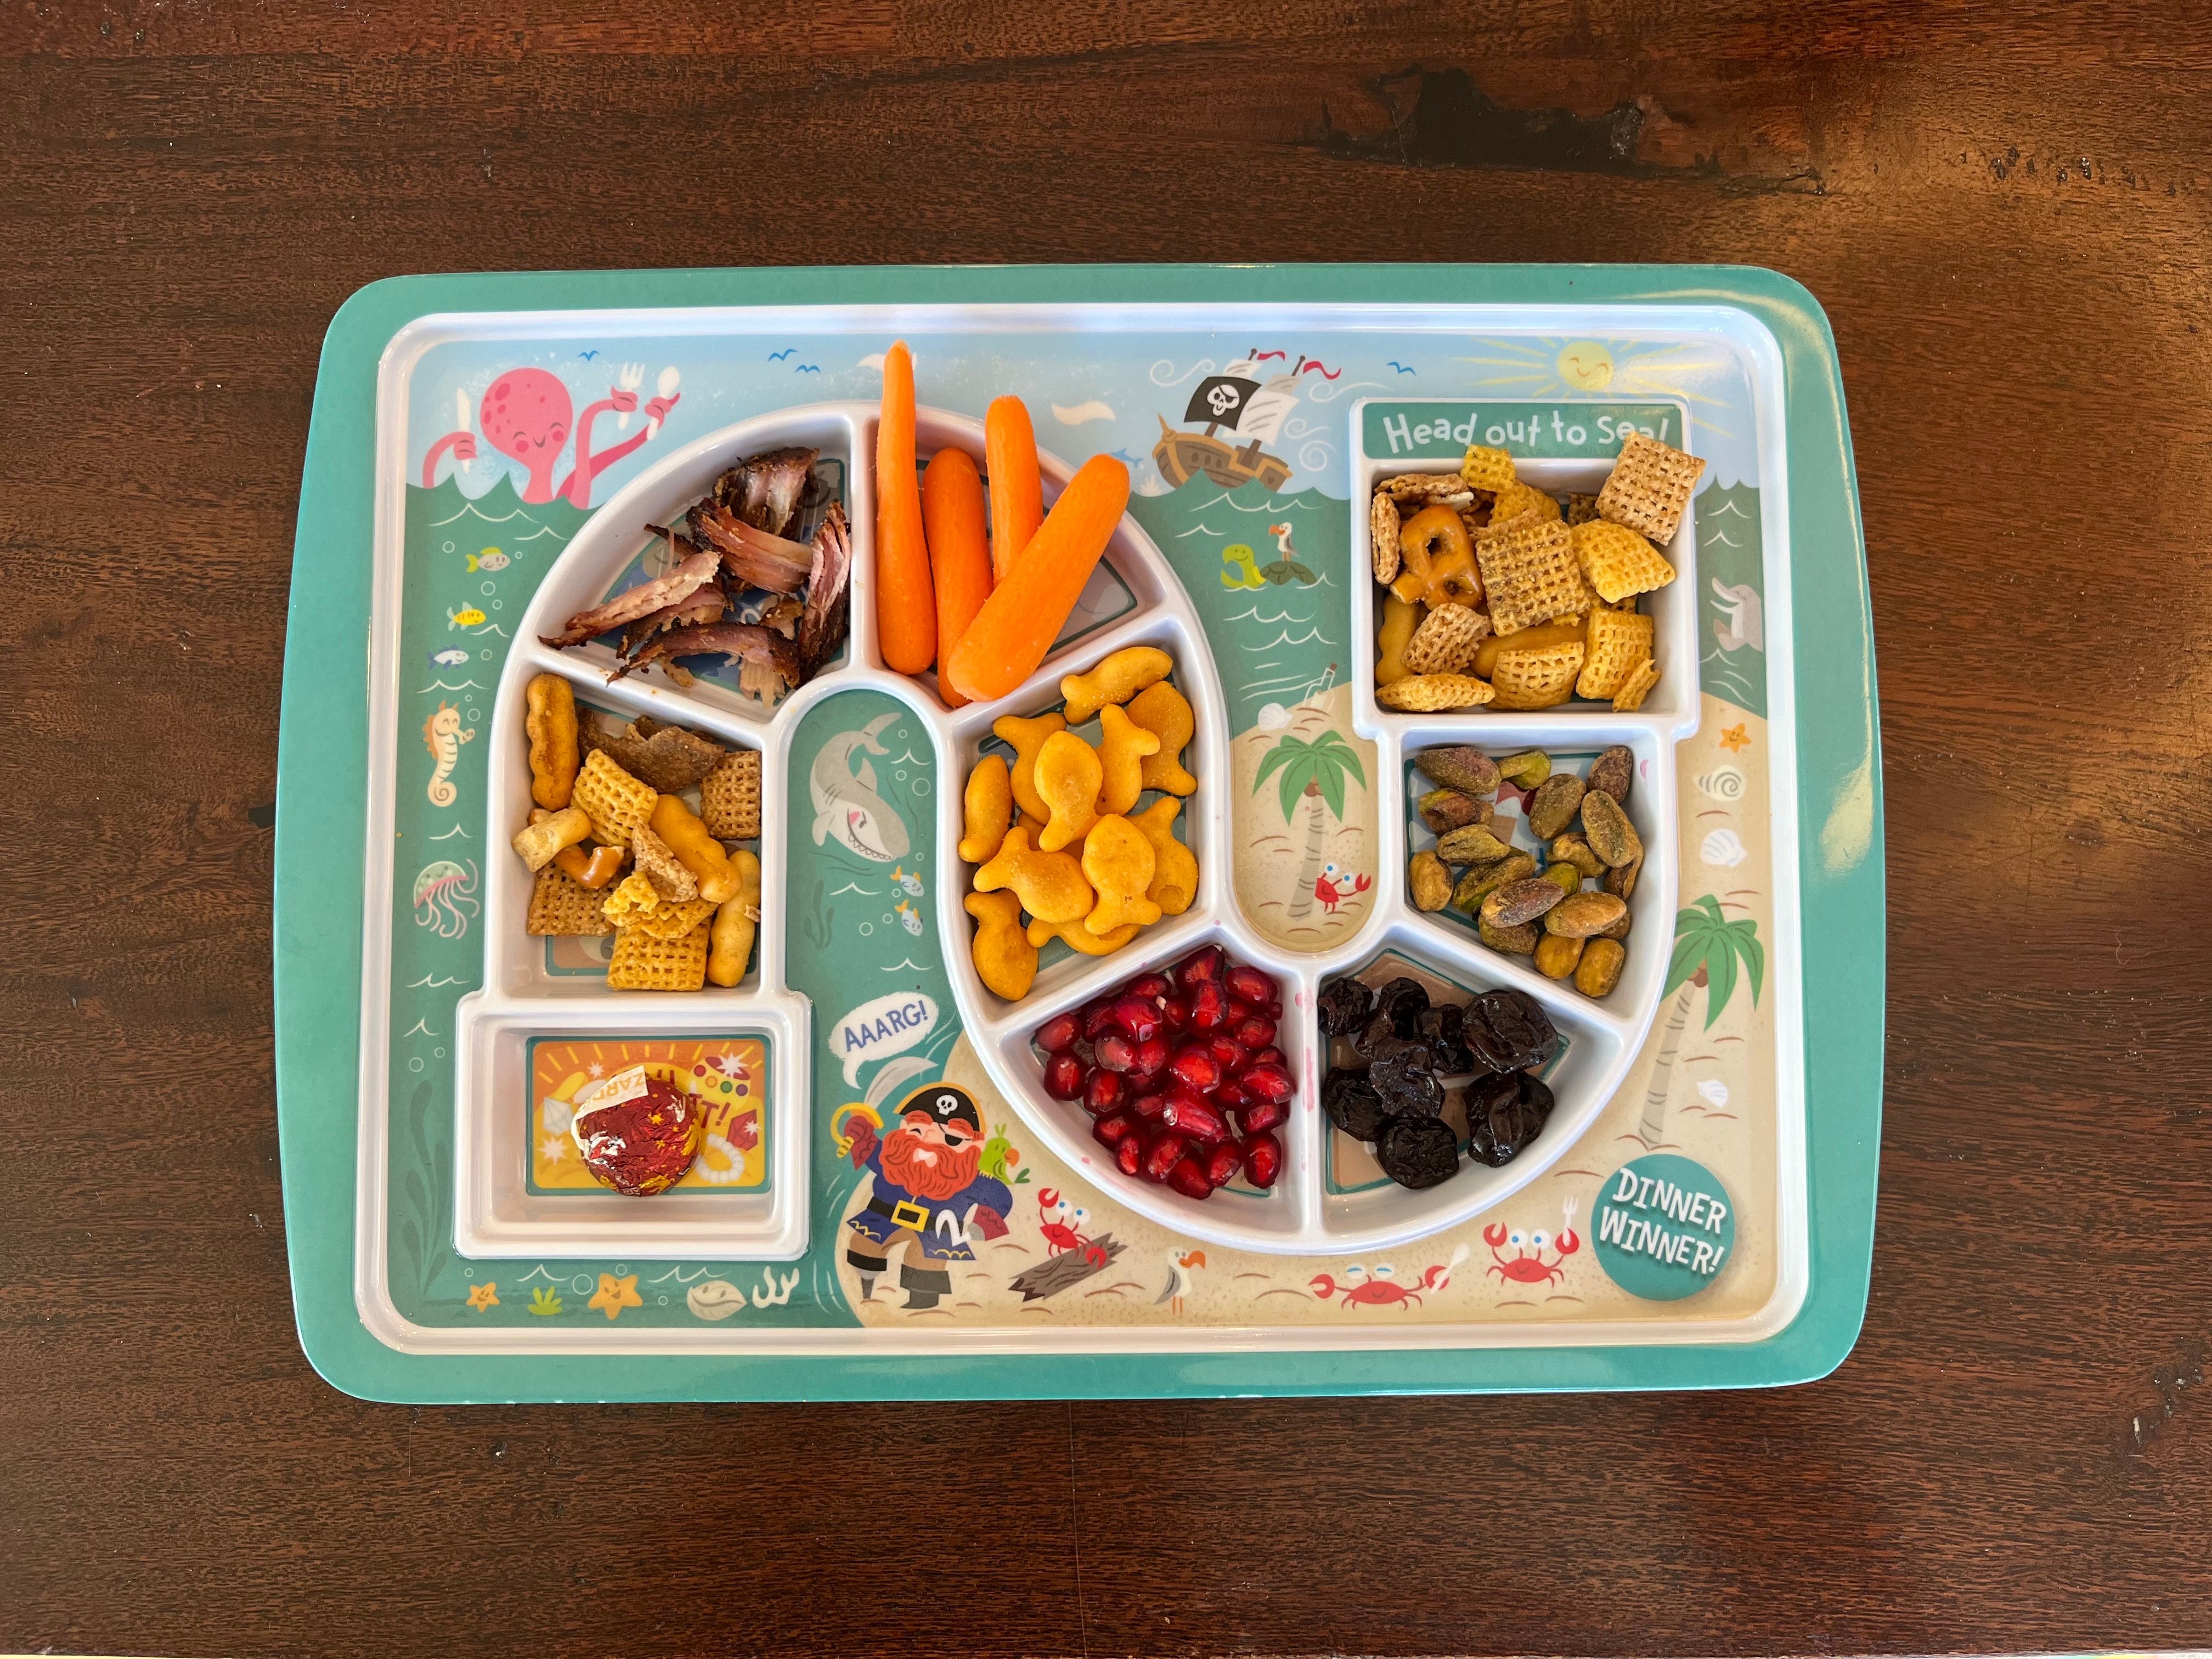 10 Bento-Box Lunches My Picky Kid Loves - The Mom Edit